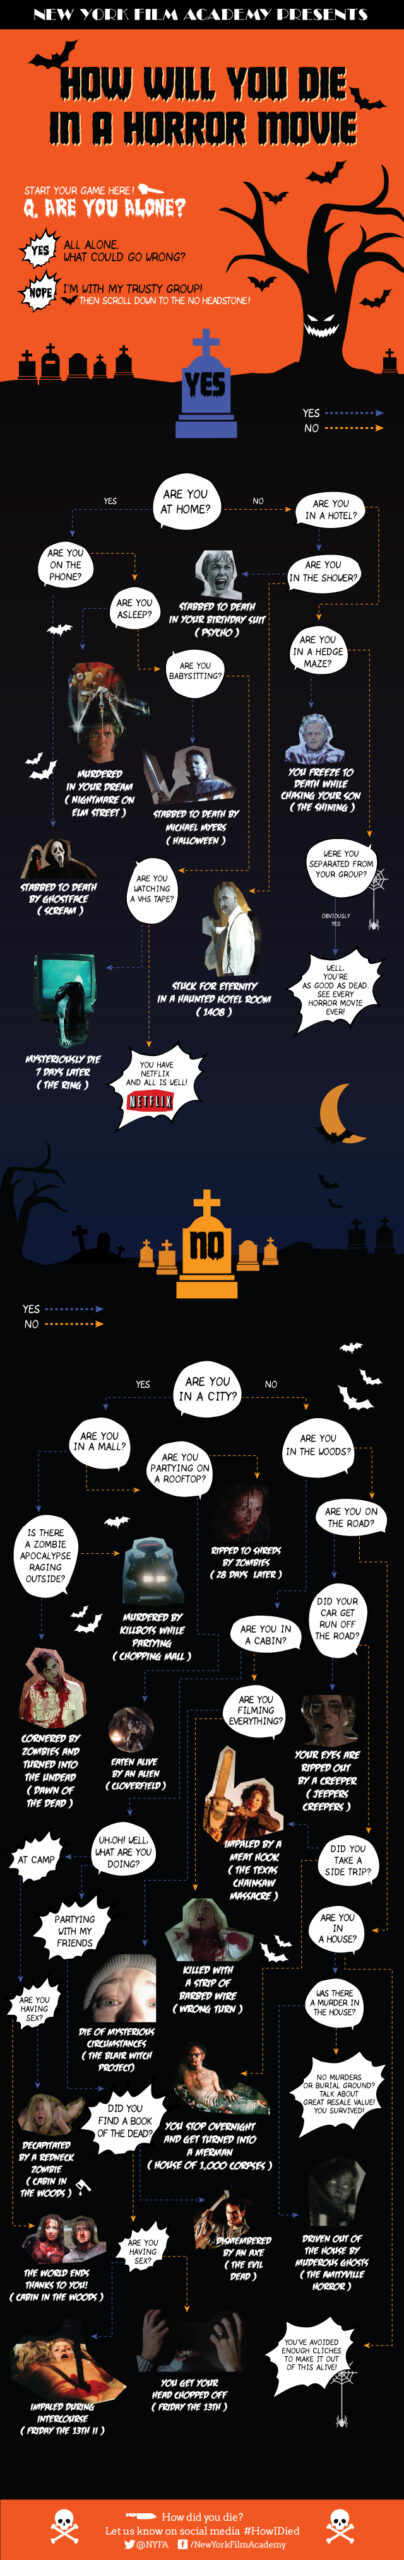 NYFA's How Will You Die In A Horror Movie graphic